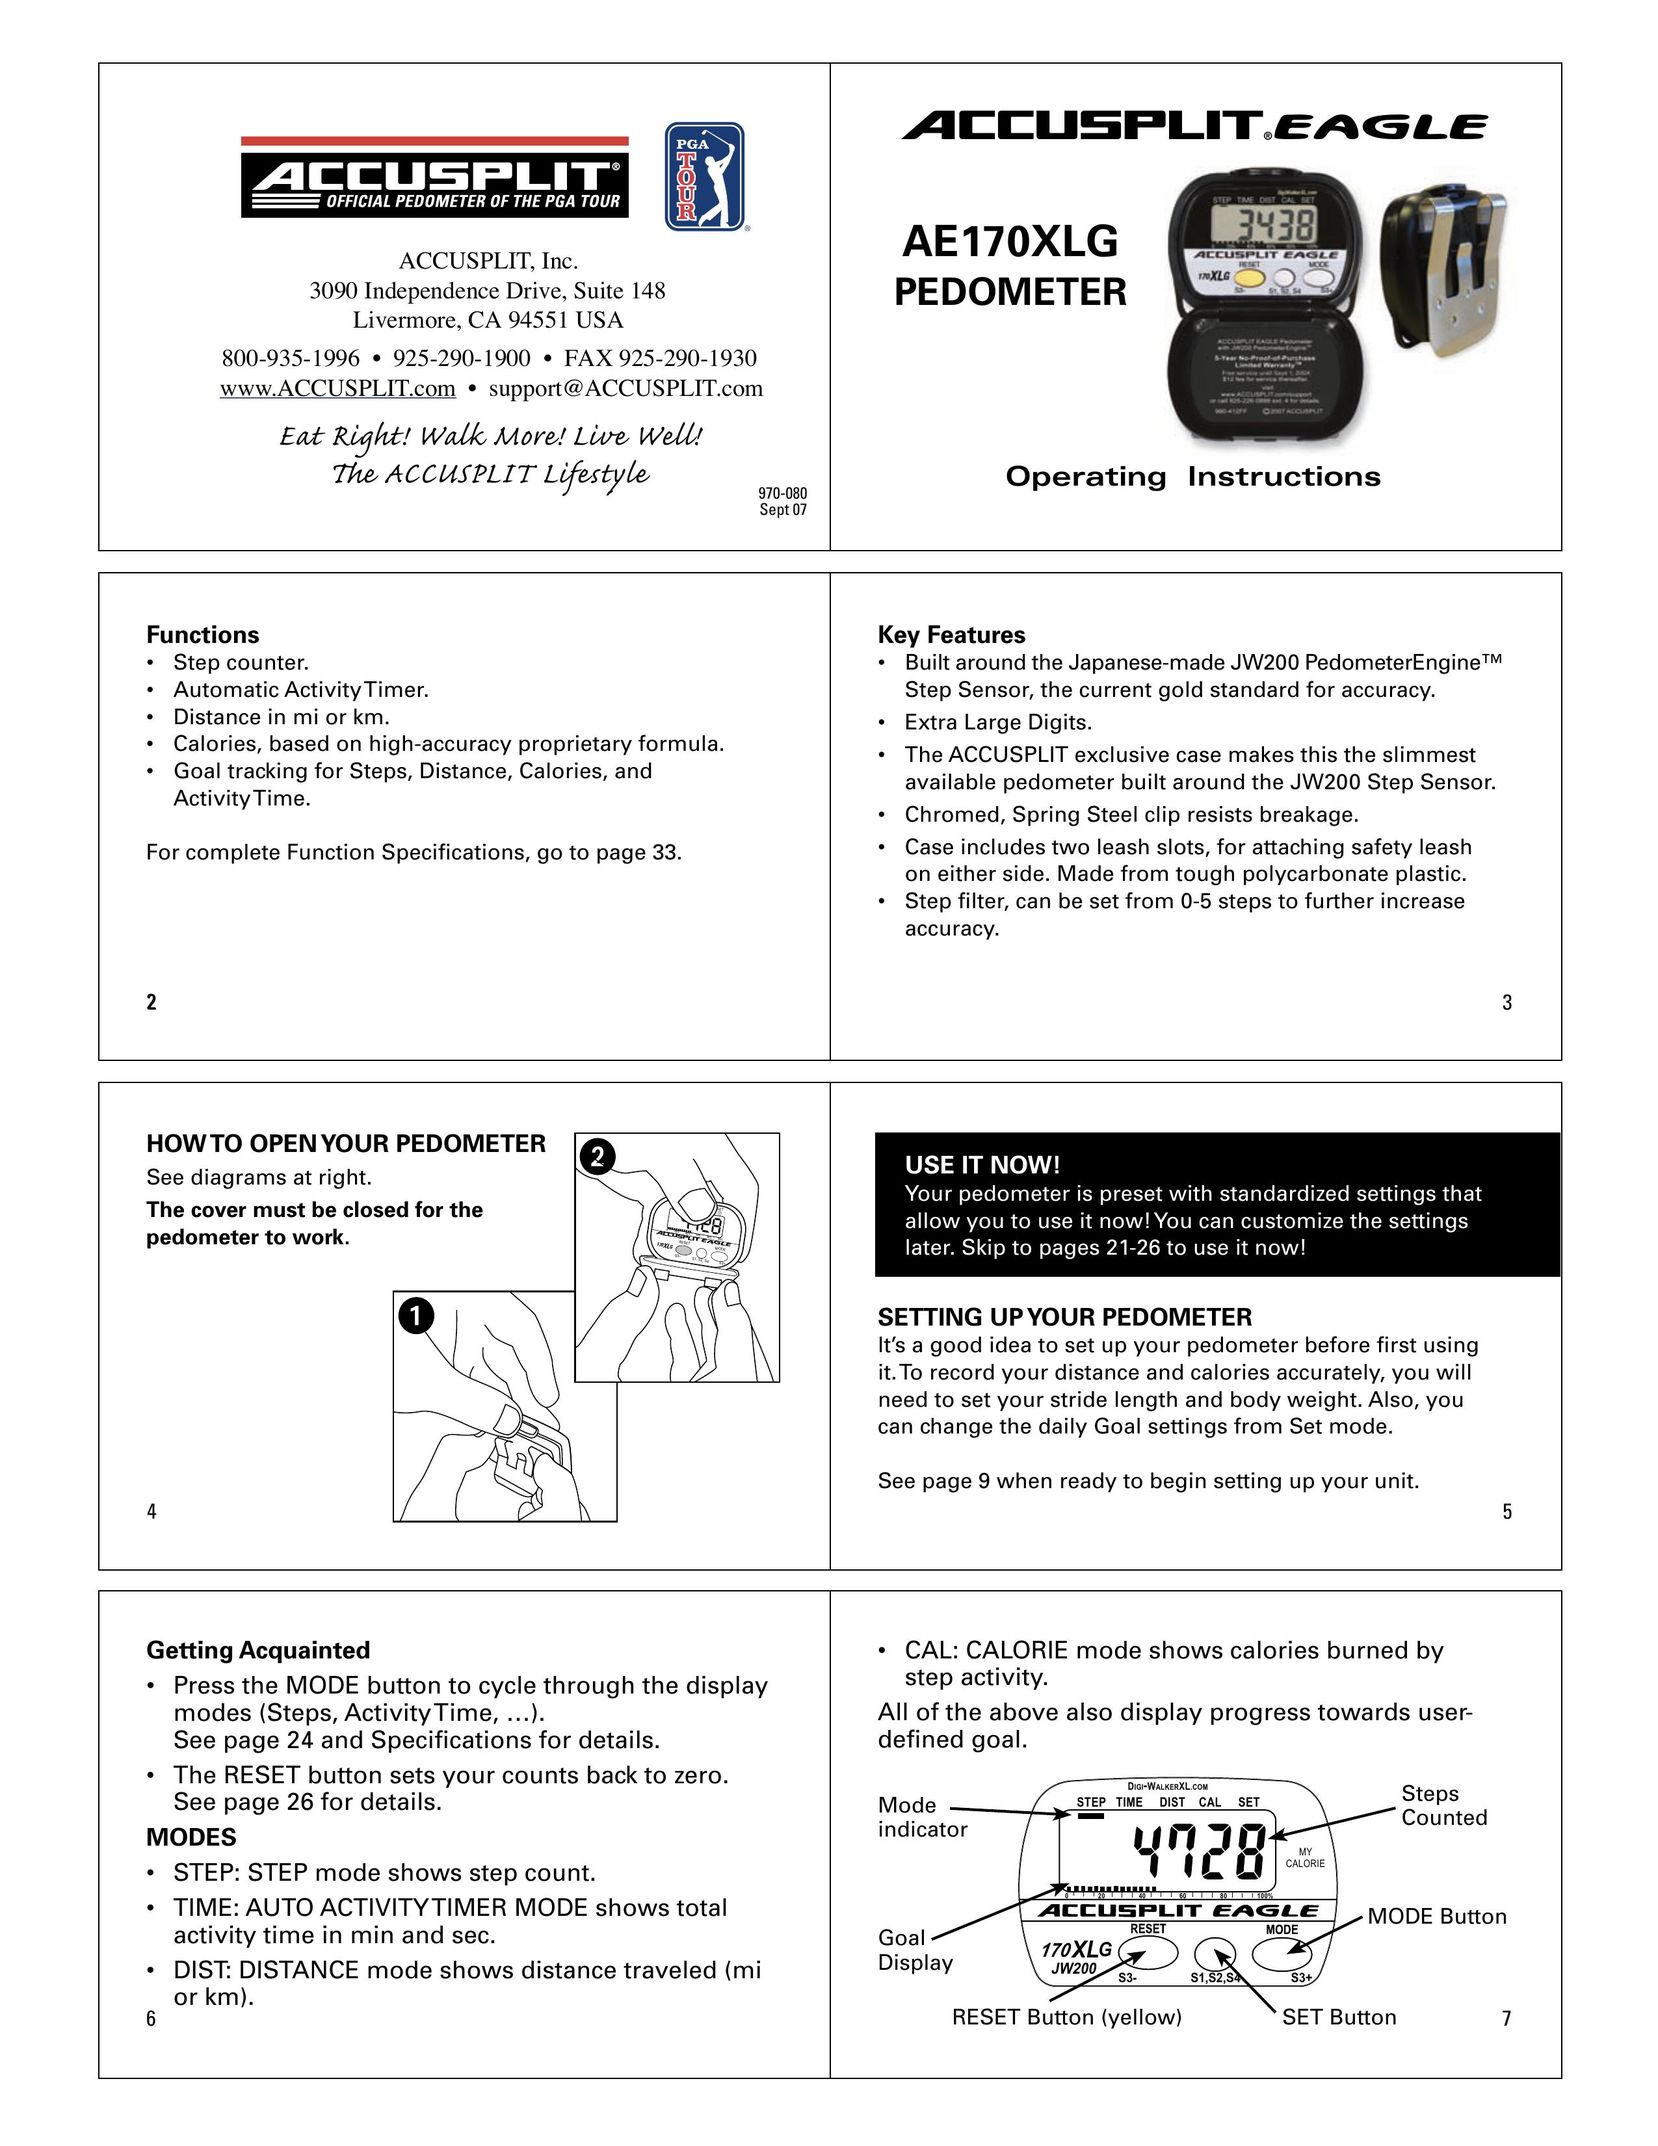 Accusplit AE170XLG Fitness Electronics User Manual